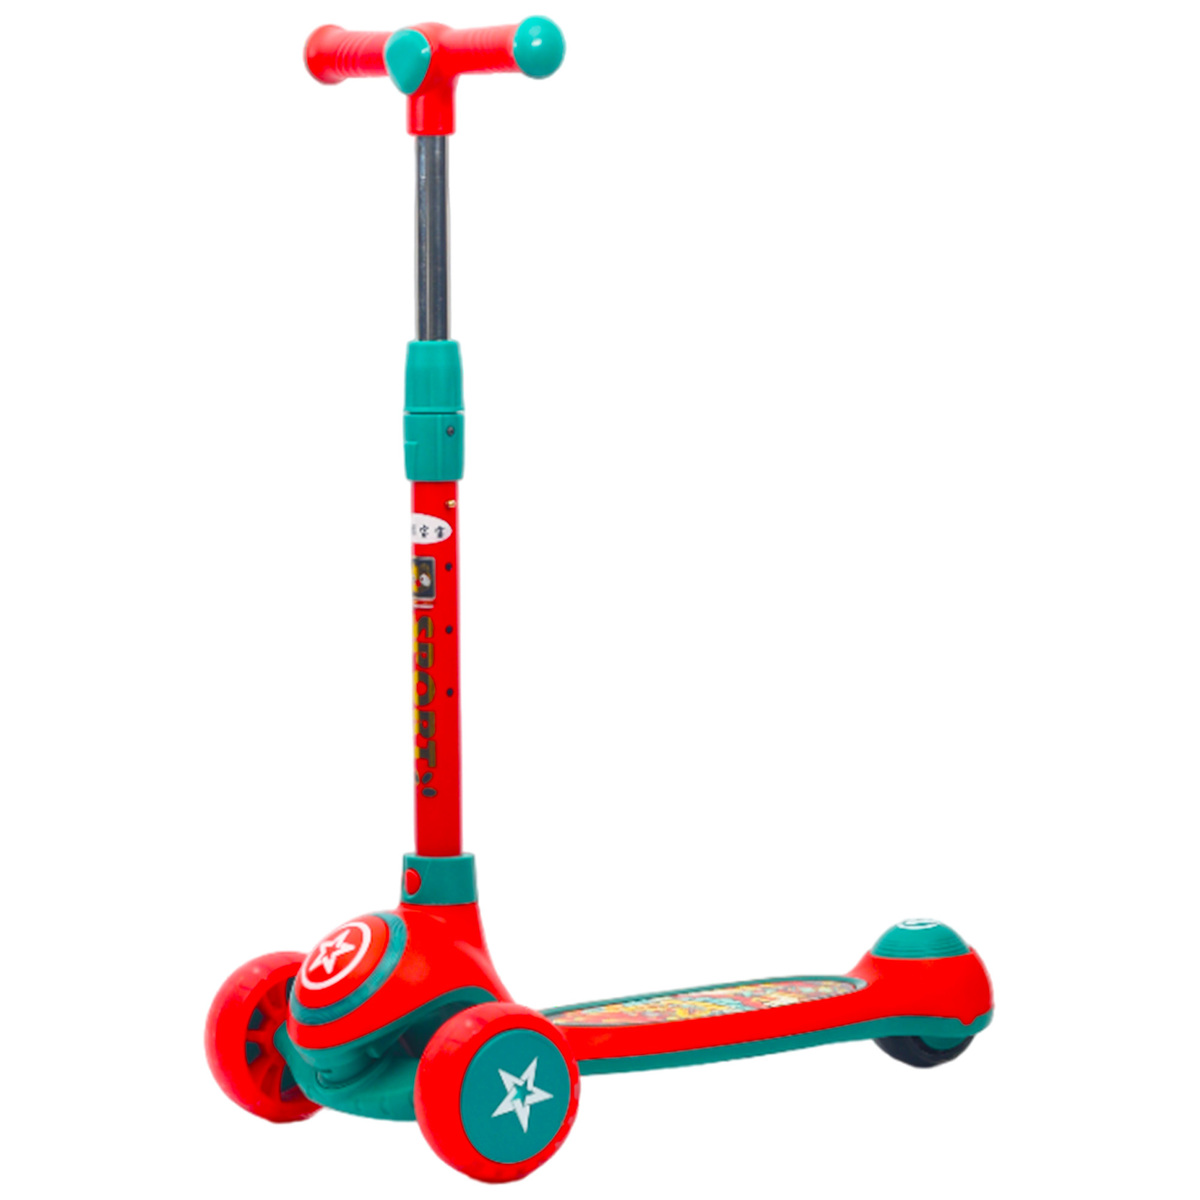 Skid Fusion Twister Scooter 3750481-8P Assorted